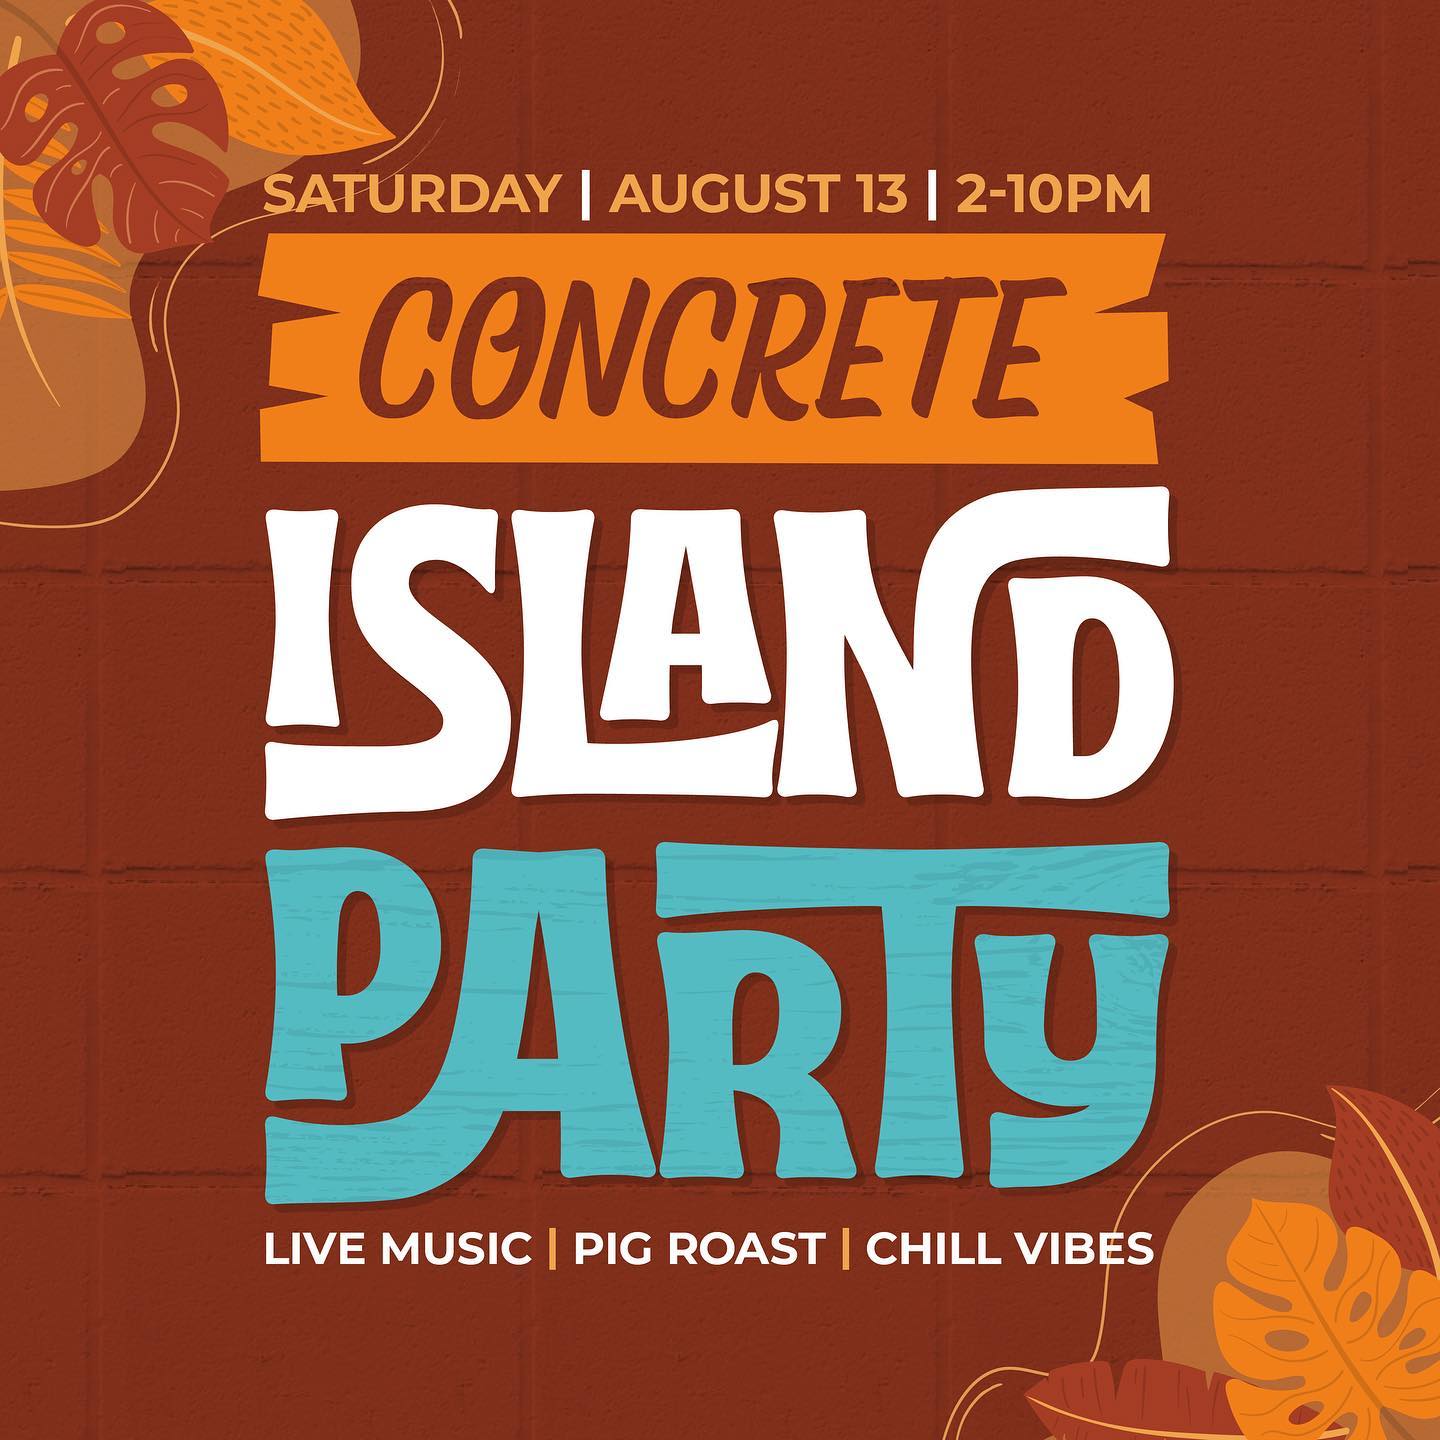 🌺Bust out your Hawaiian shirt and join us THIS SATURDAY for our Concrete Island Party from 2-10! 

🐖 Join us for a pig roast from 3-6pm!

🥁 Live performance by a steel drum from 3-5pm!

🎤 Live music from reggae-funk band, @sparechangetrio from 6-8pm!

🍺 A beer trailer will provide fresh suds from us & @componentbeer 

☀️Enjoy patio games like bags, giant Jenga, hammerschlagen & more!

🌺Hawaiian shirts are highly encouraged!